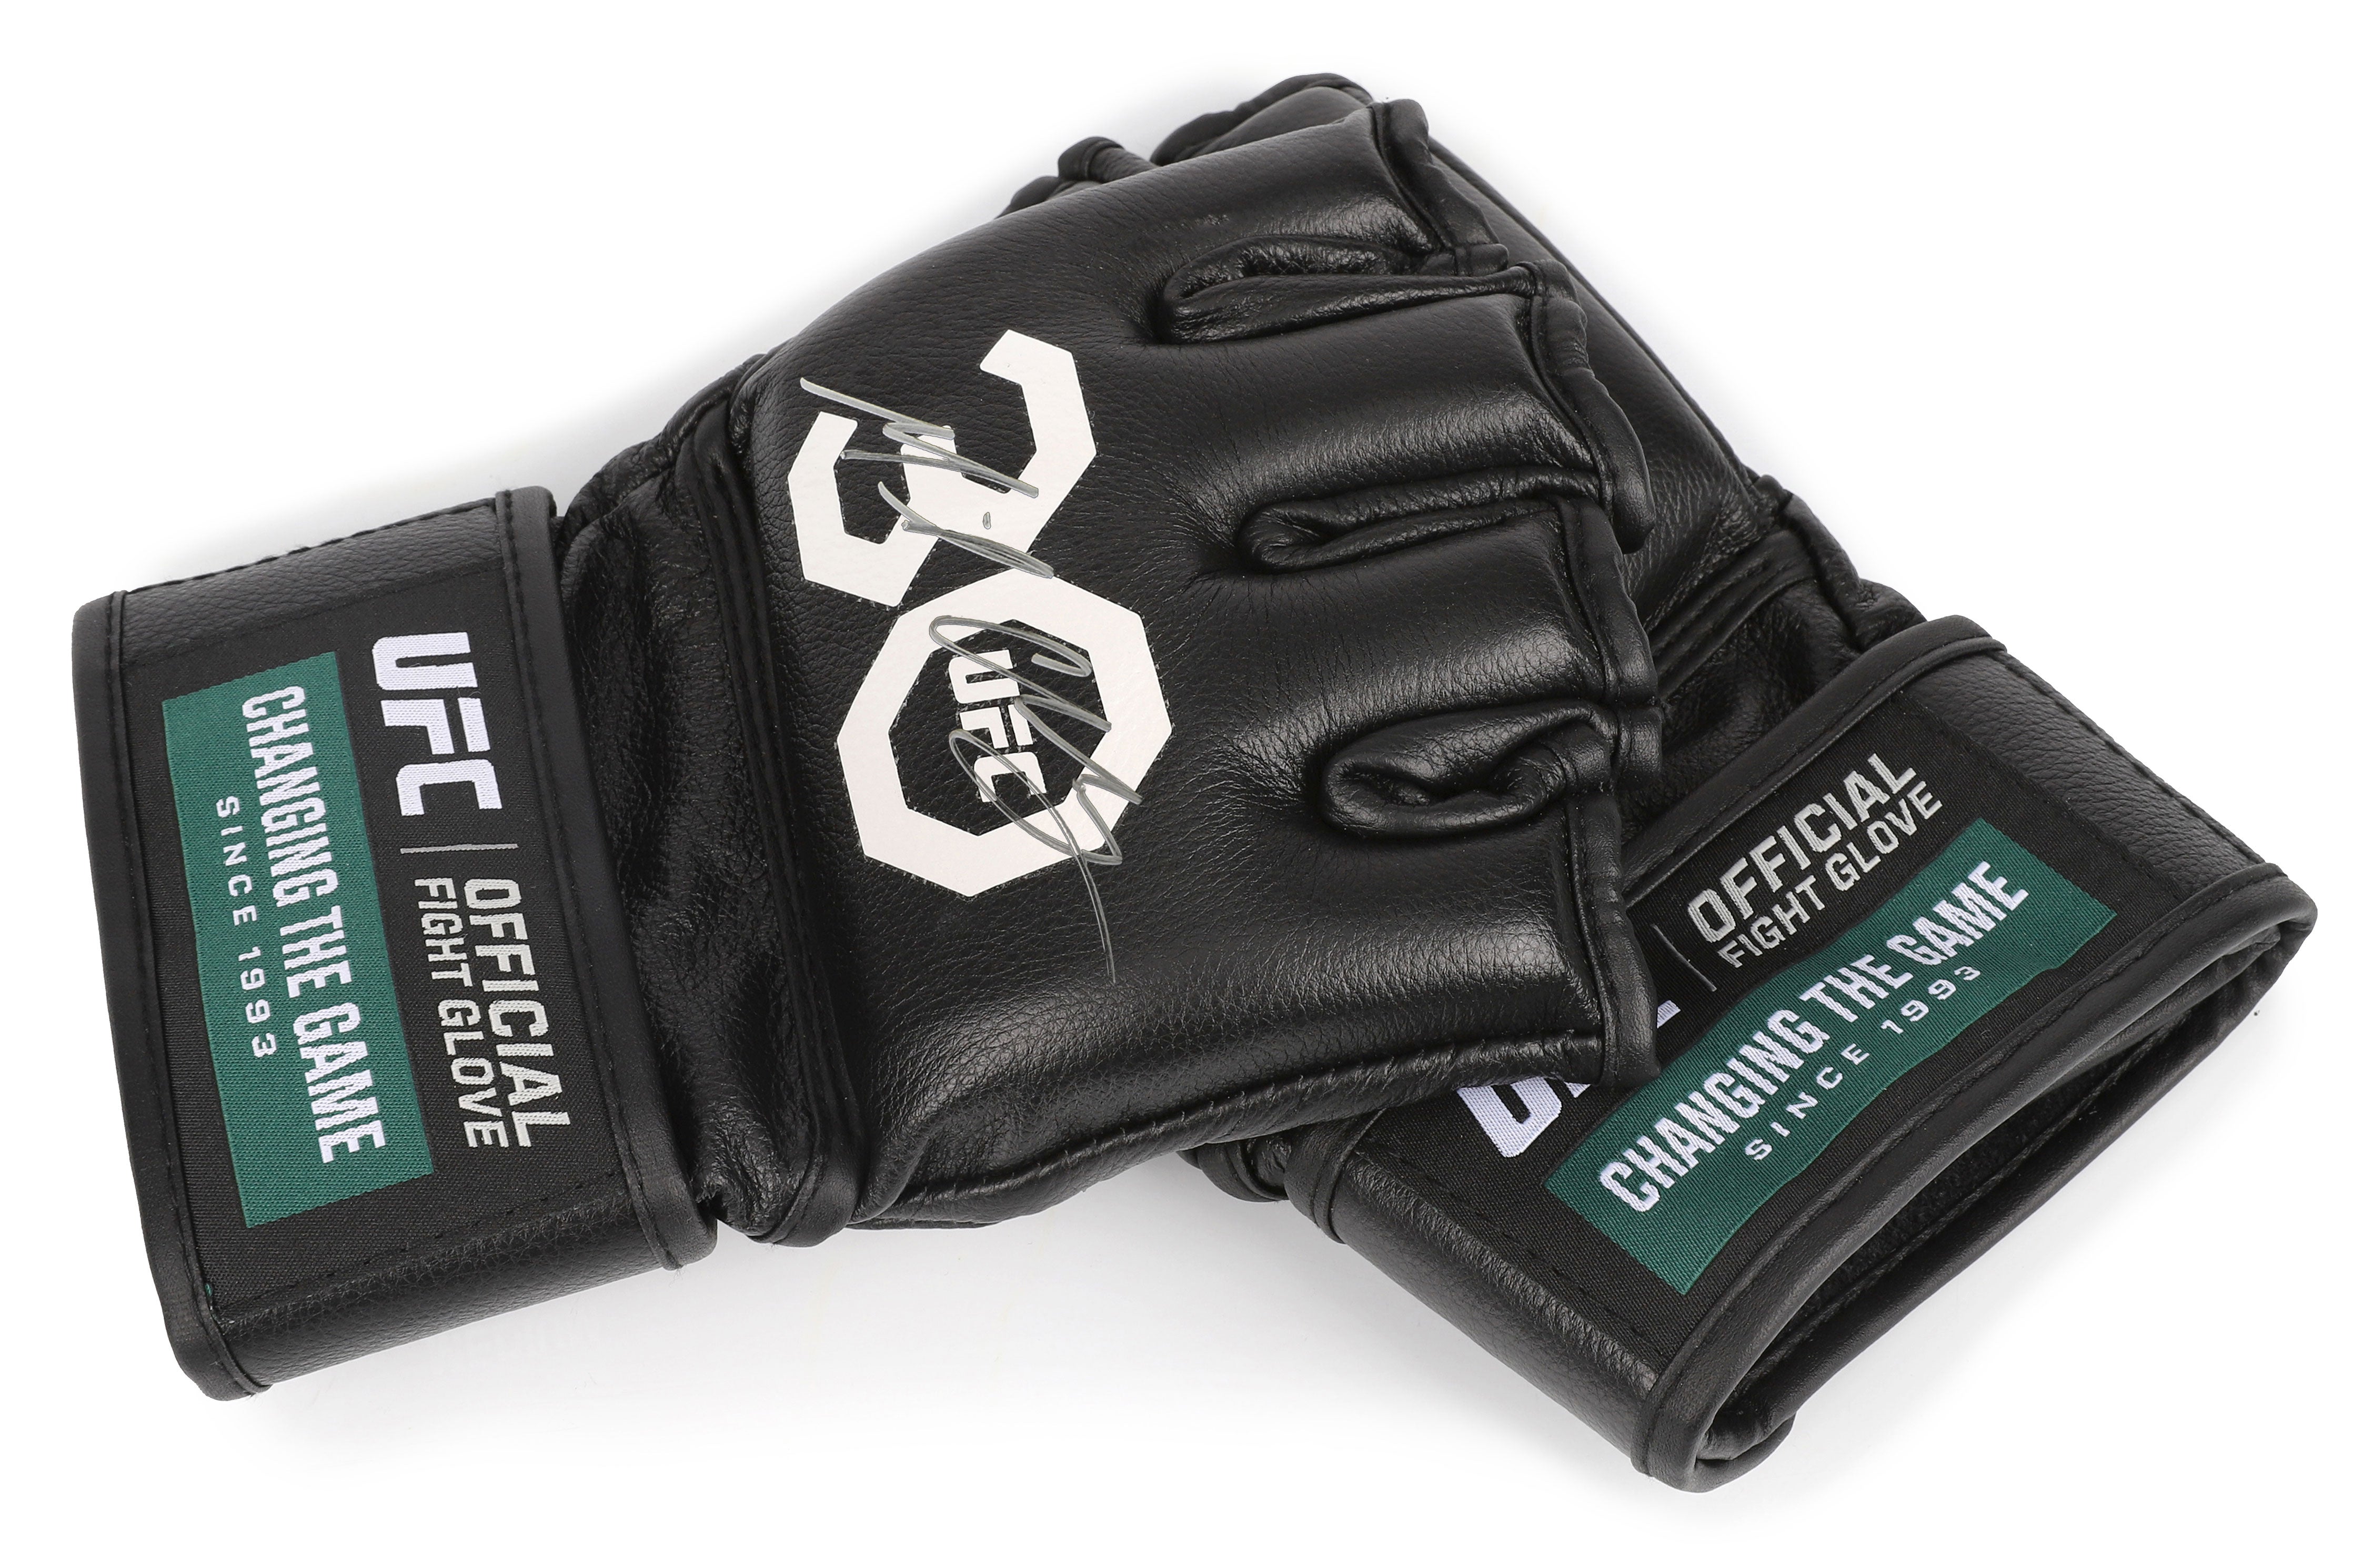 Michael Chandler Signed Official UFC Gloves – 30th Anniversary Edition